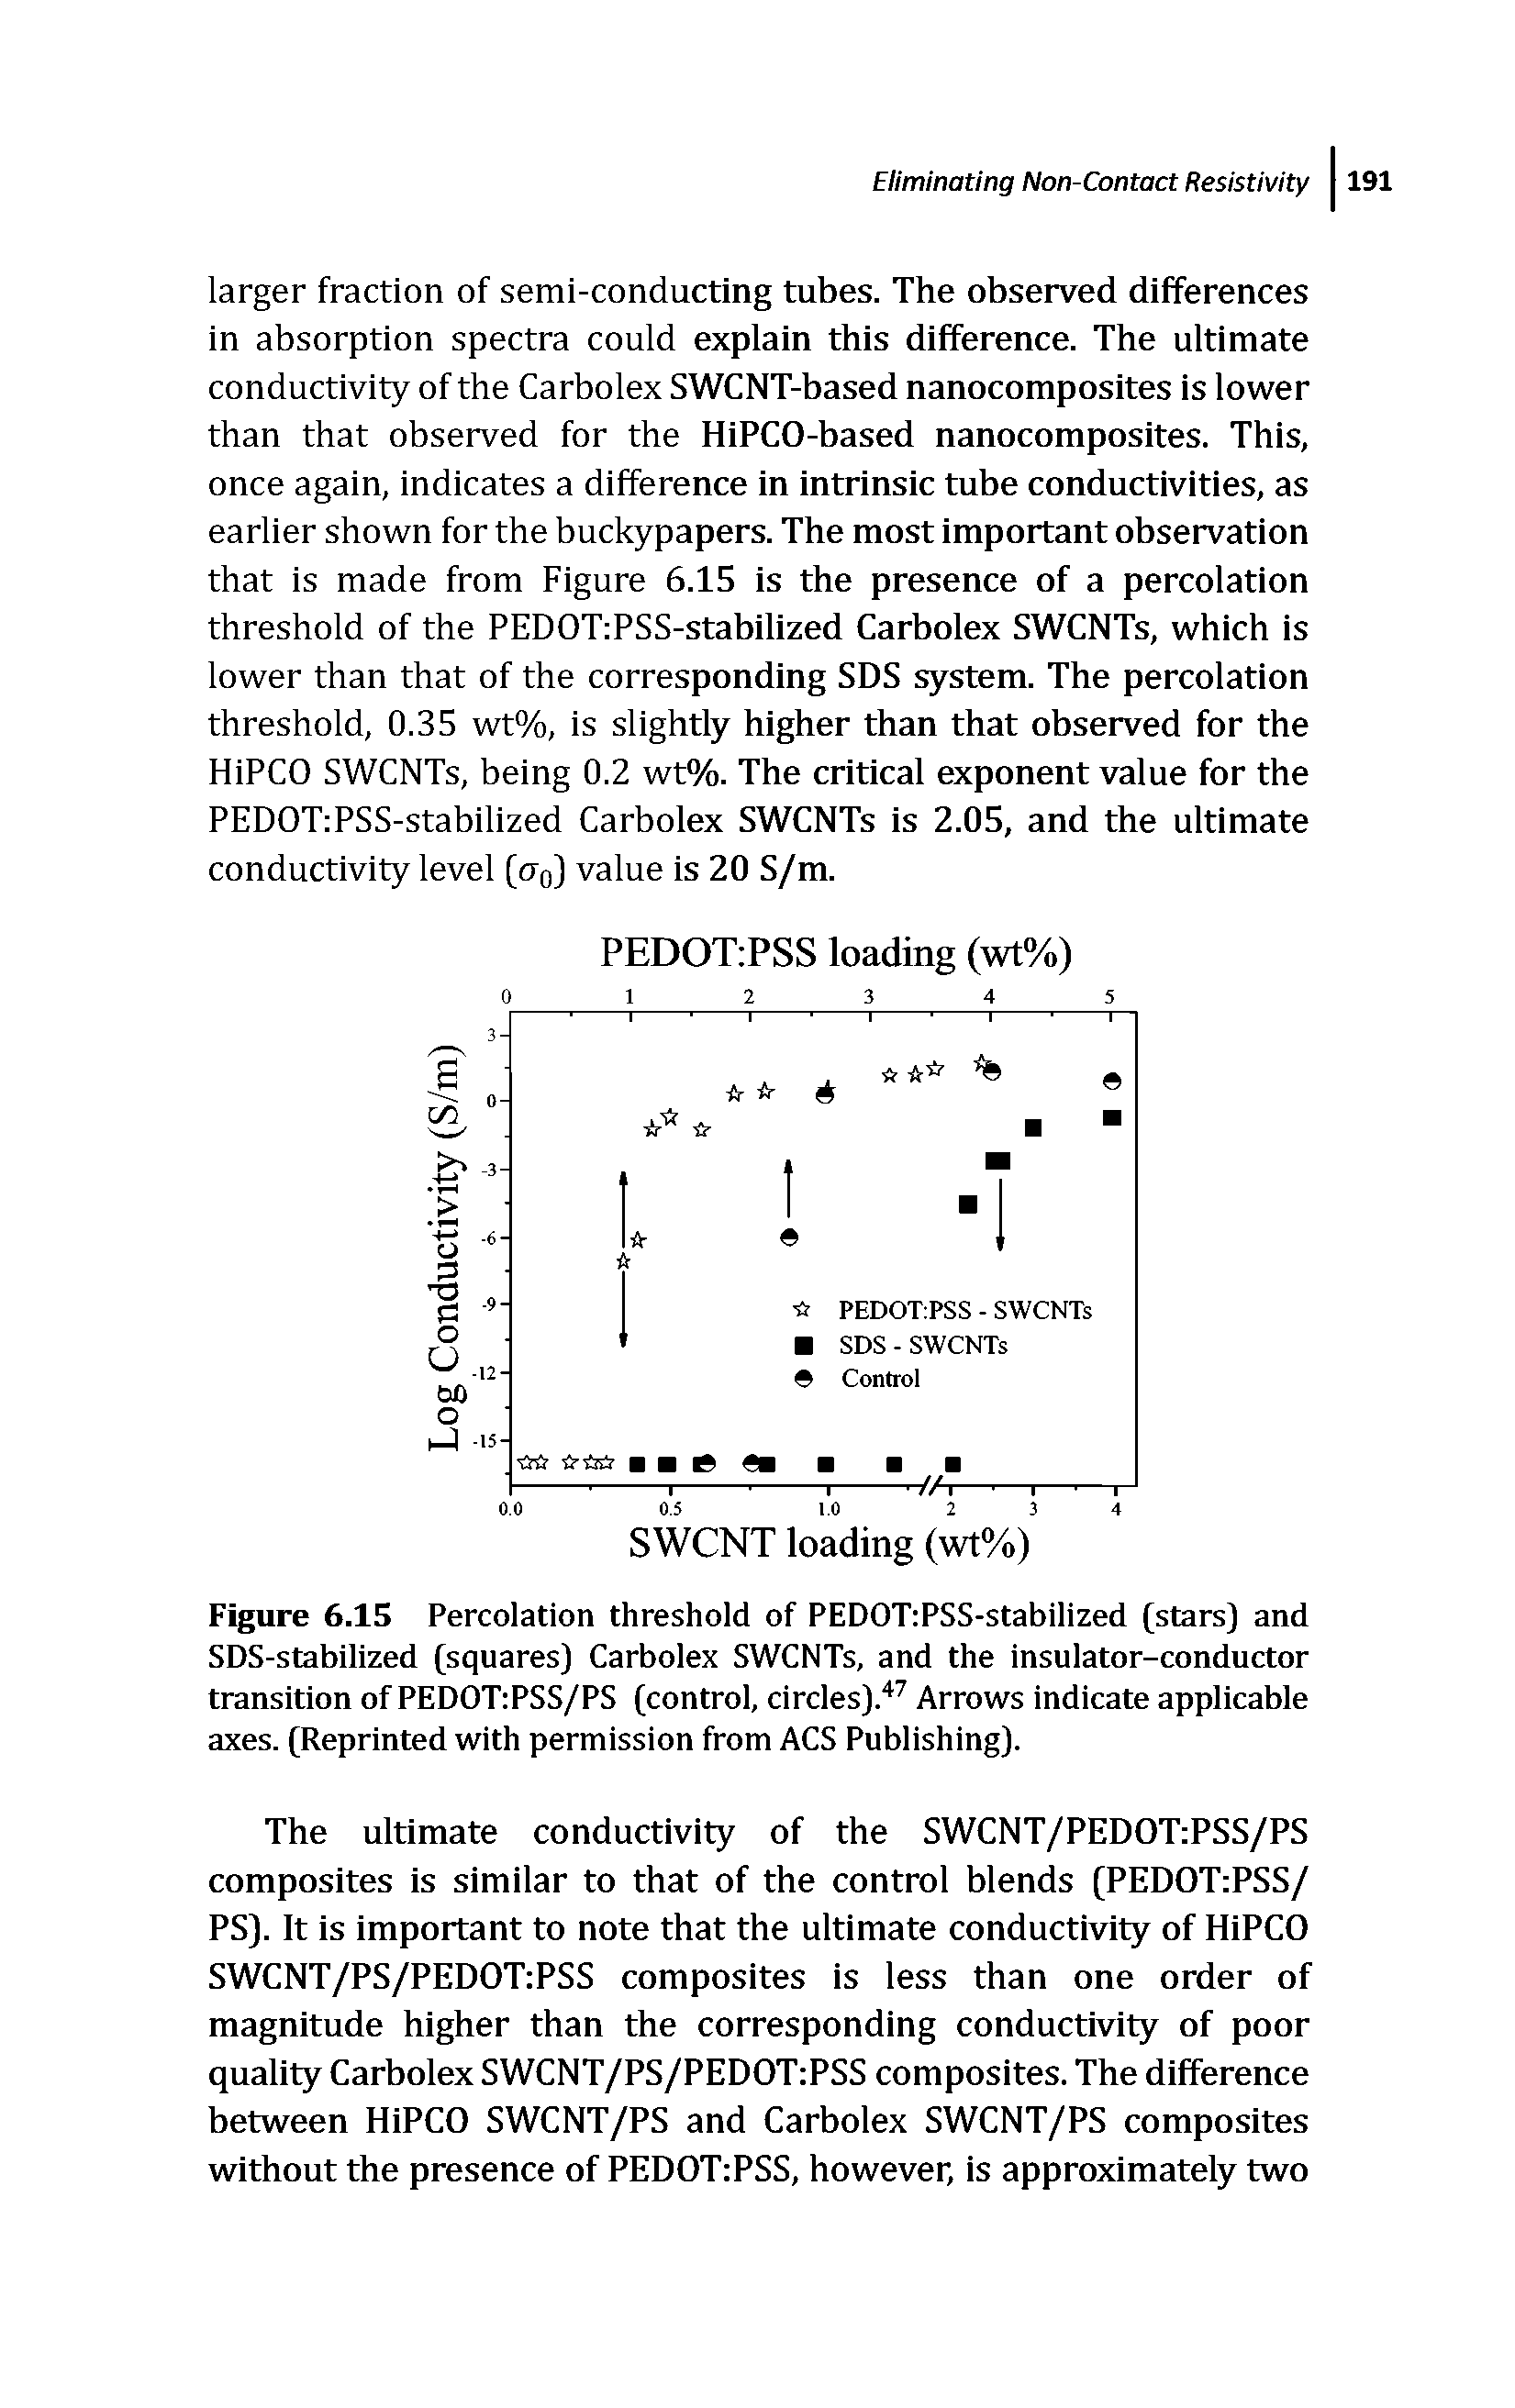 Figure 6.15 Percolation threshold of PEDOT PSS-stabilized (stars) and SDS-stabilized (squares) Carbolex SWCNTs, and the insulator-conductor transition of PEDOT PSS/PS (control, circles). Arrows indicate applicable axes. (Reprinted with permission from ACS Publishing).